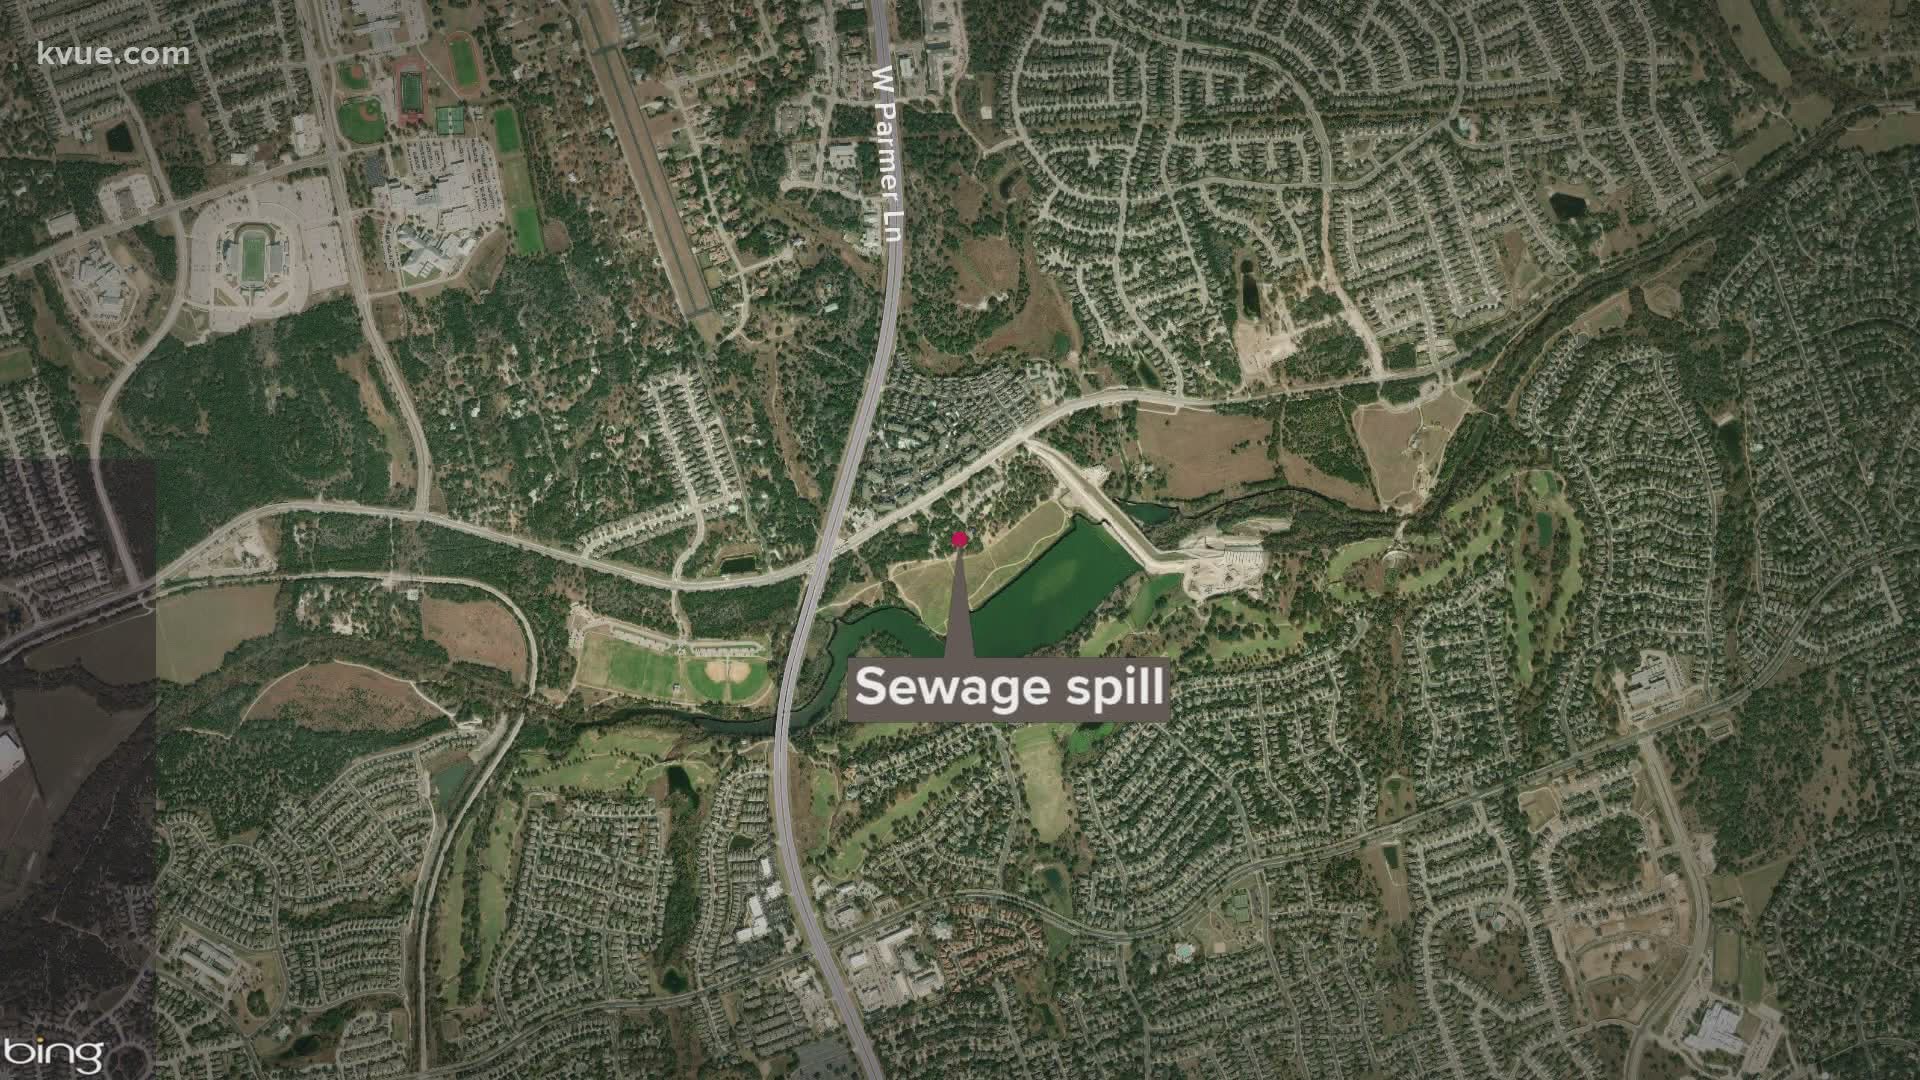 Crews continue to check for water contamination after a sewage spill in Brushy Creek.